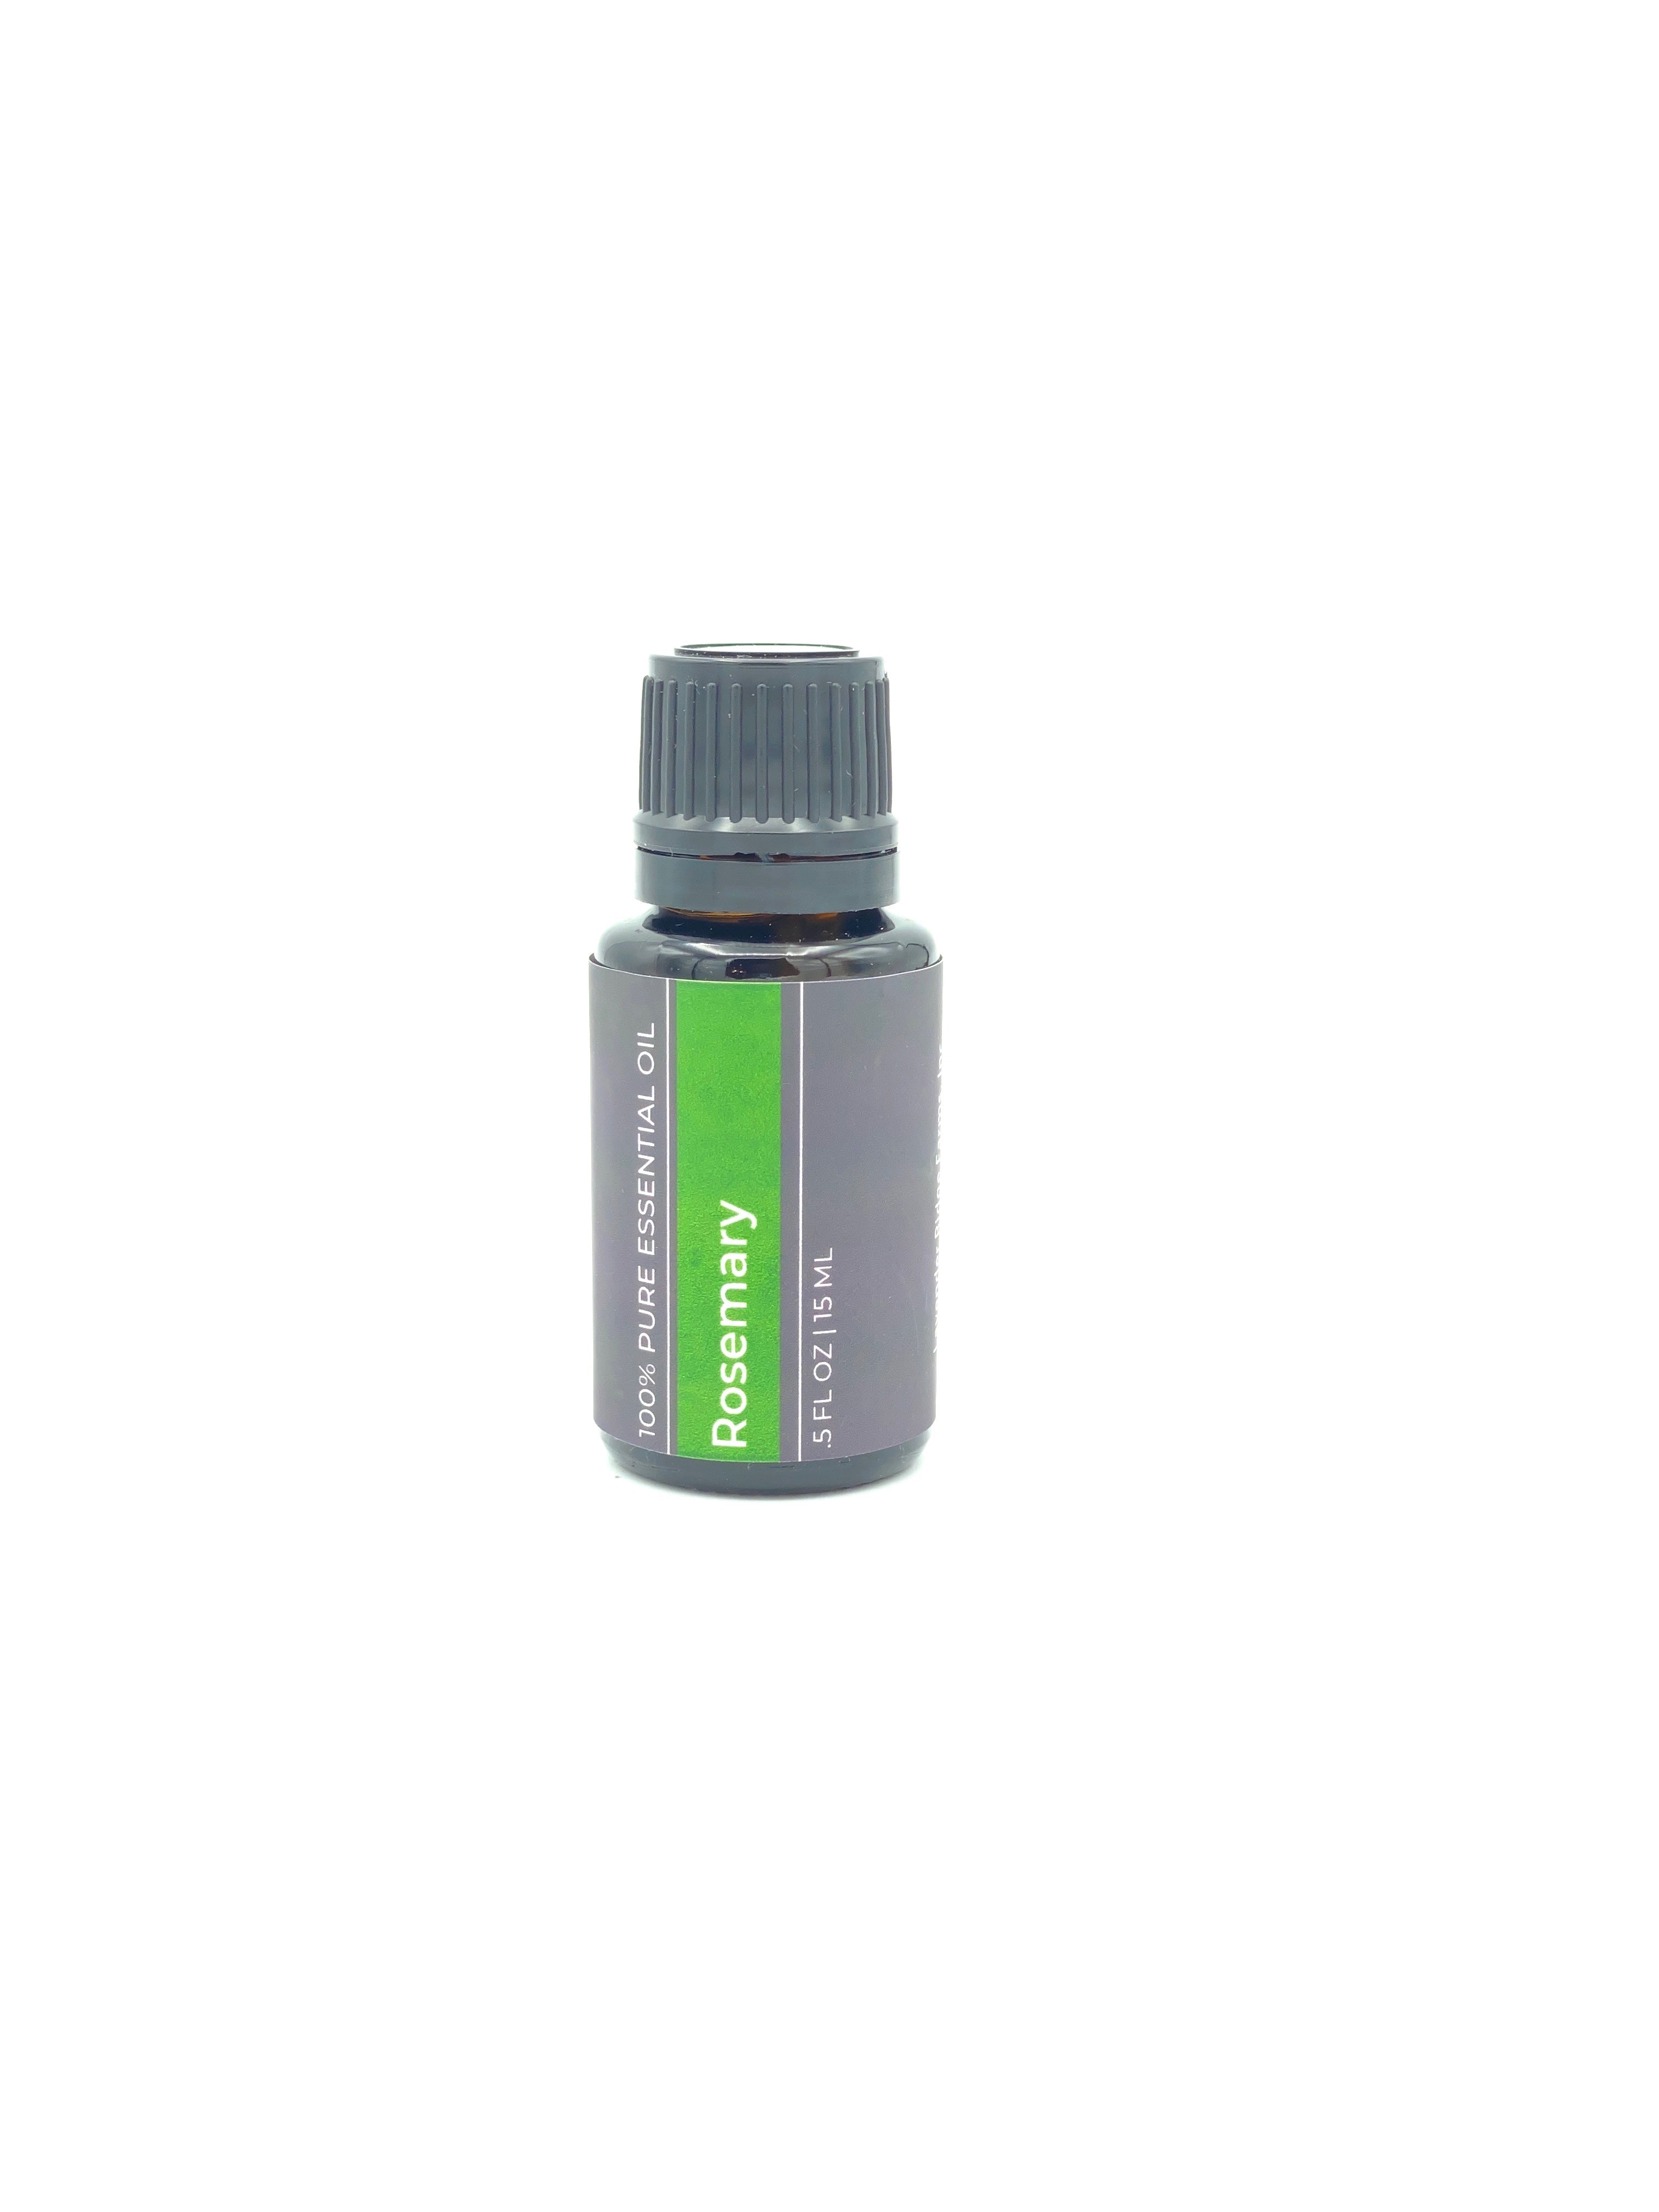 Rosemary Essential Oil - Pure Rosemary Oil Food Grade